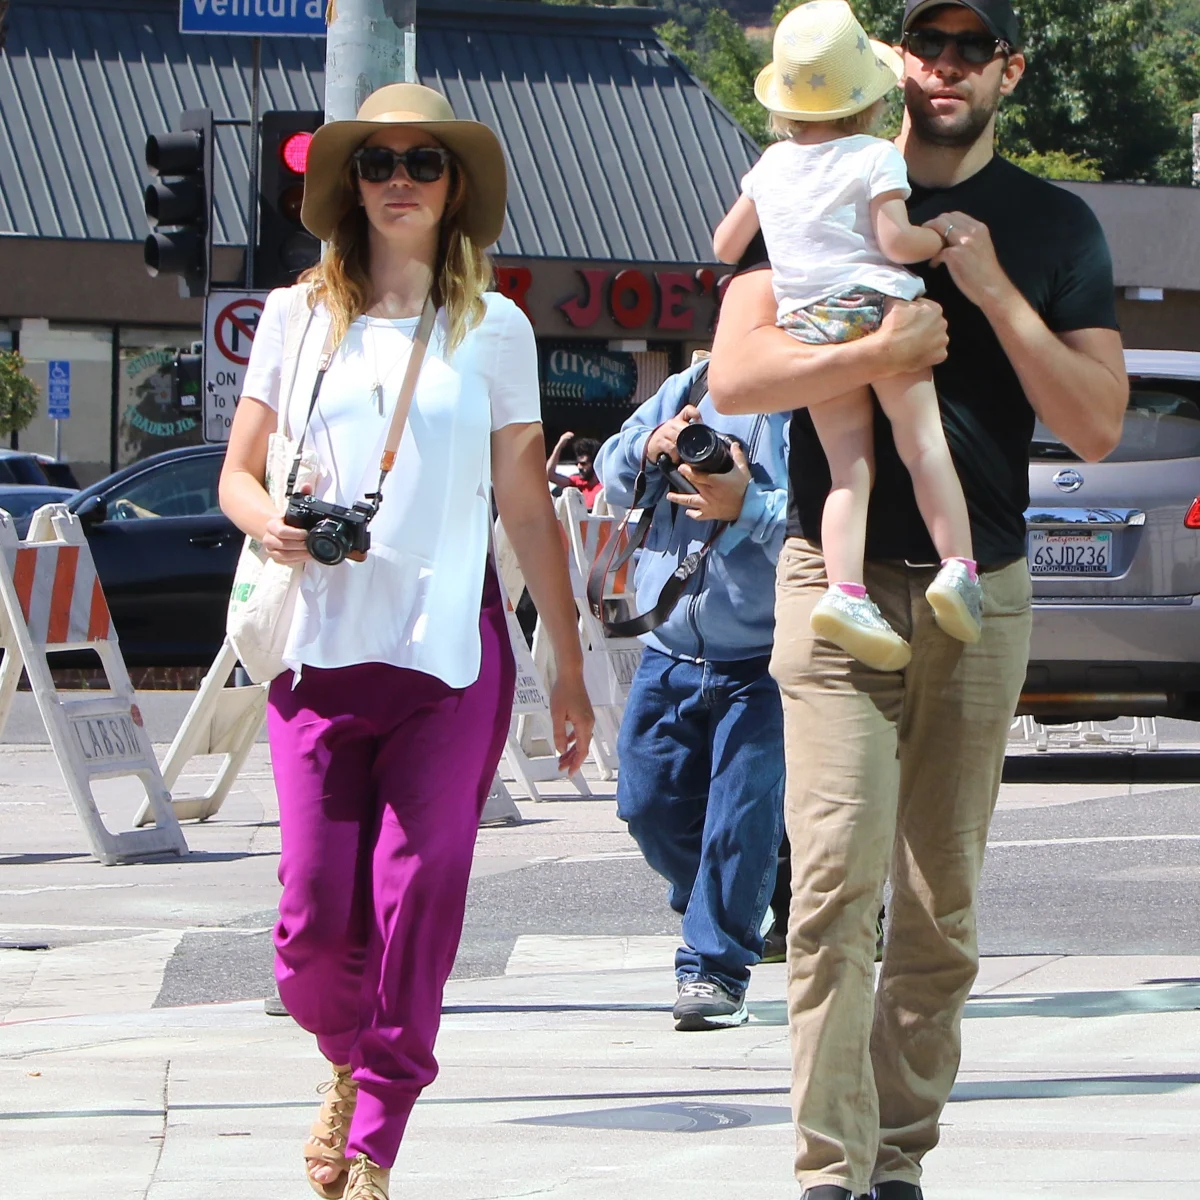 John Krasinski carrying his daughter and walking along with her wife Emily Blunt